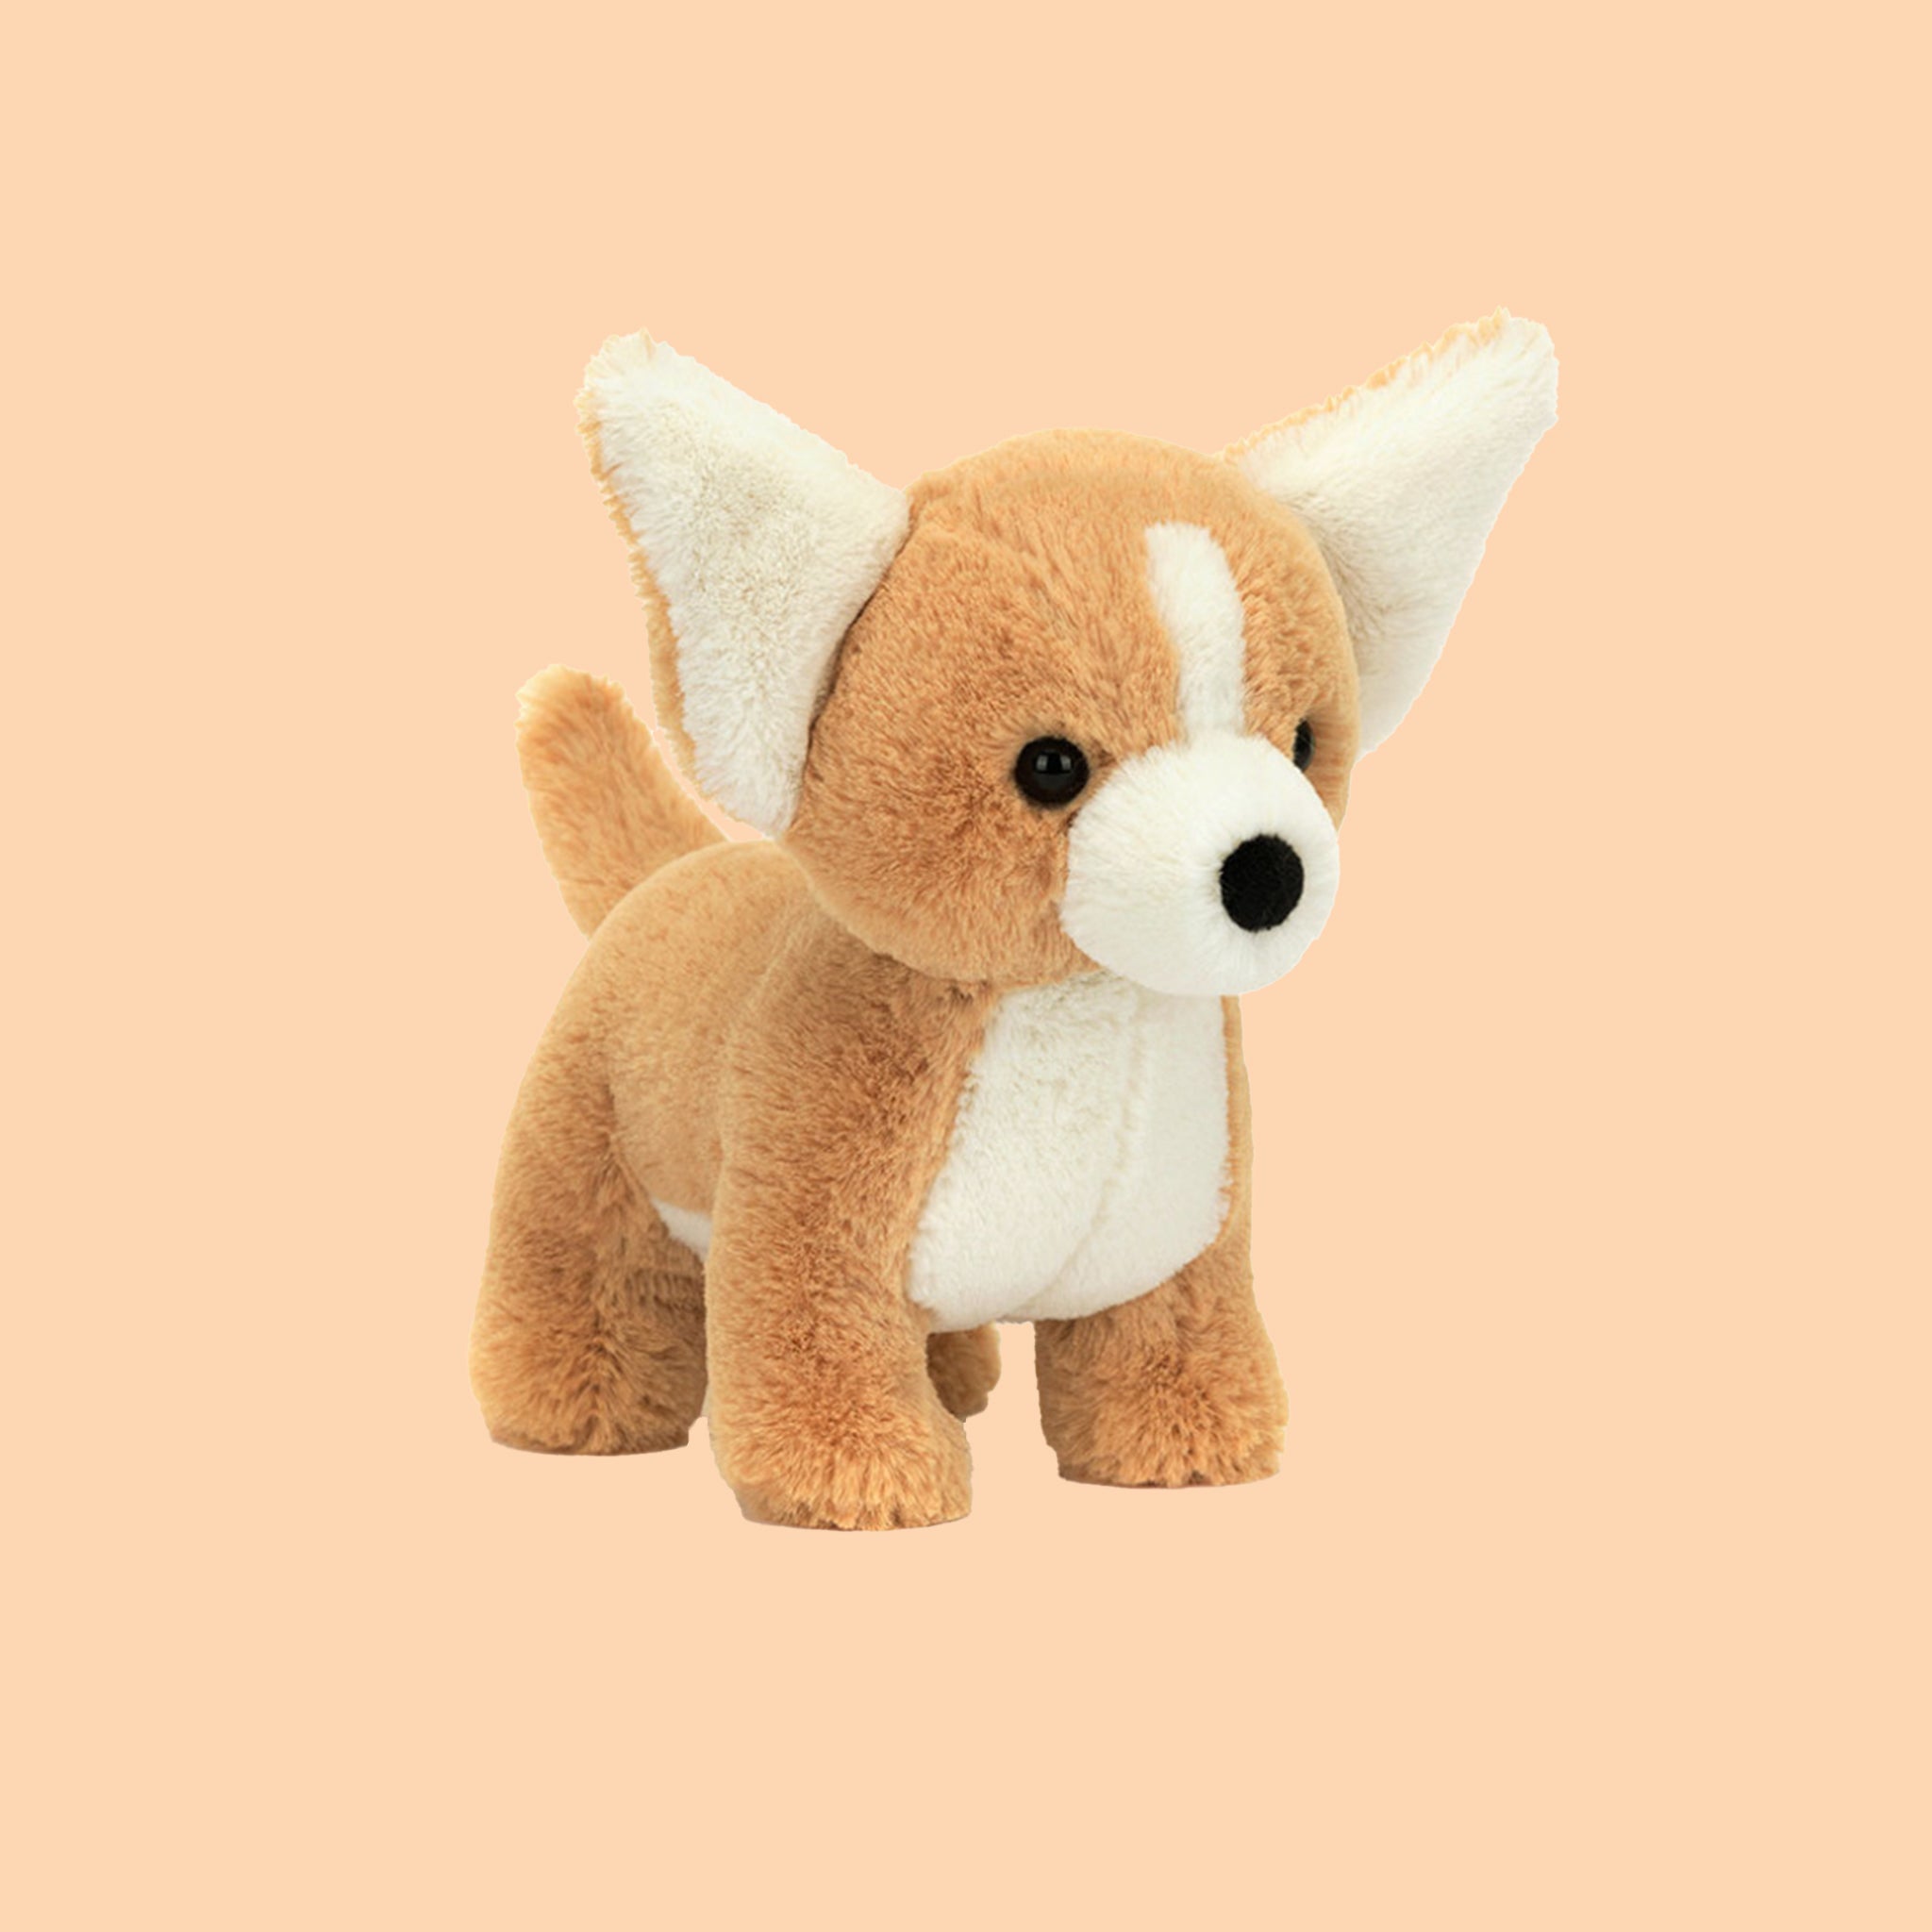 On a peachy background is a tan and white chihuahua shaped stuffed toy. 